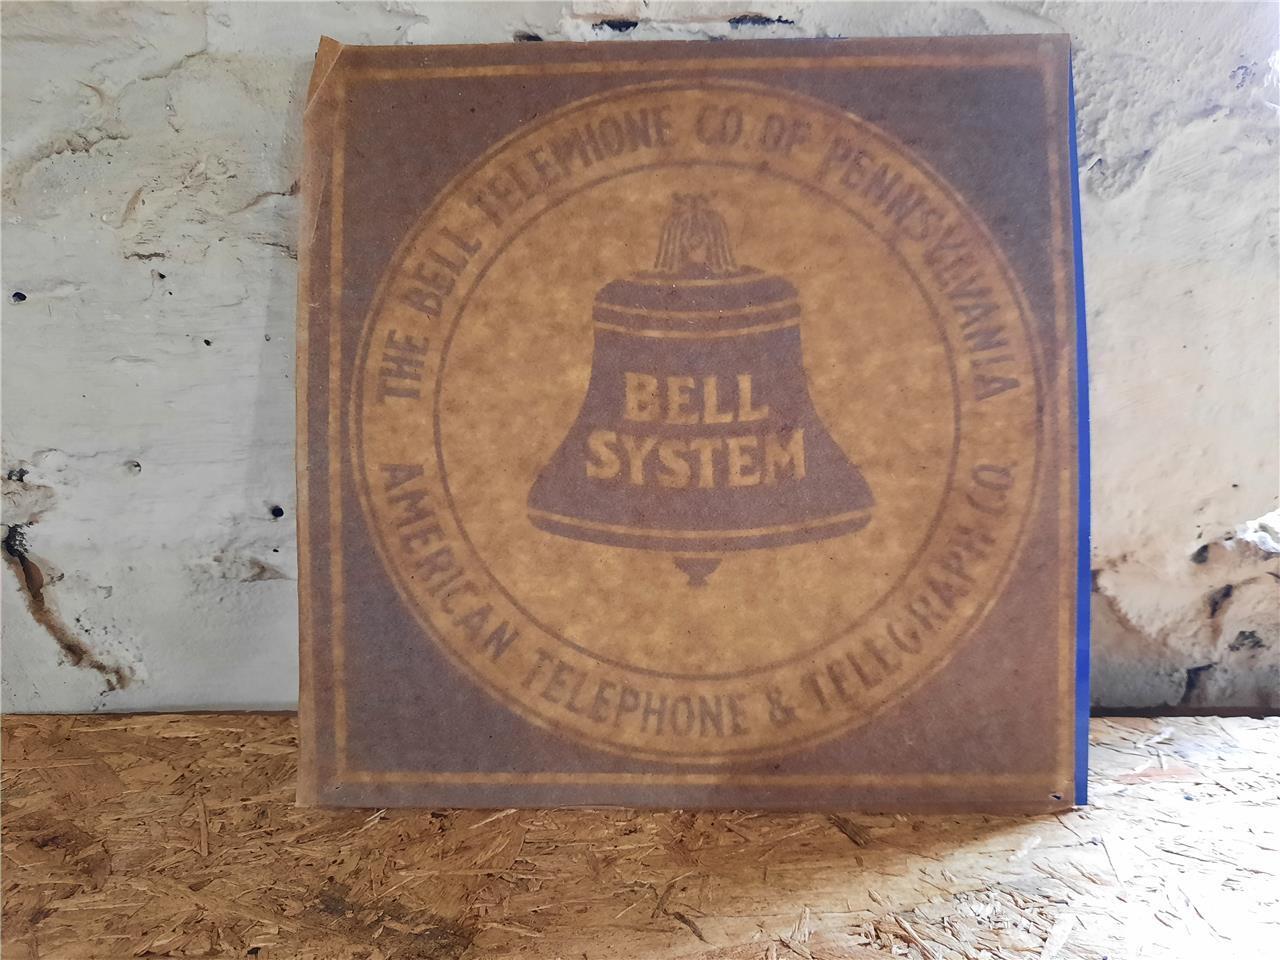 NOS TIN METAL EMBOSSED SIGN BELL SYSTEM TELEPHONE SIGN MINT WITH ORIGINAL PAPER